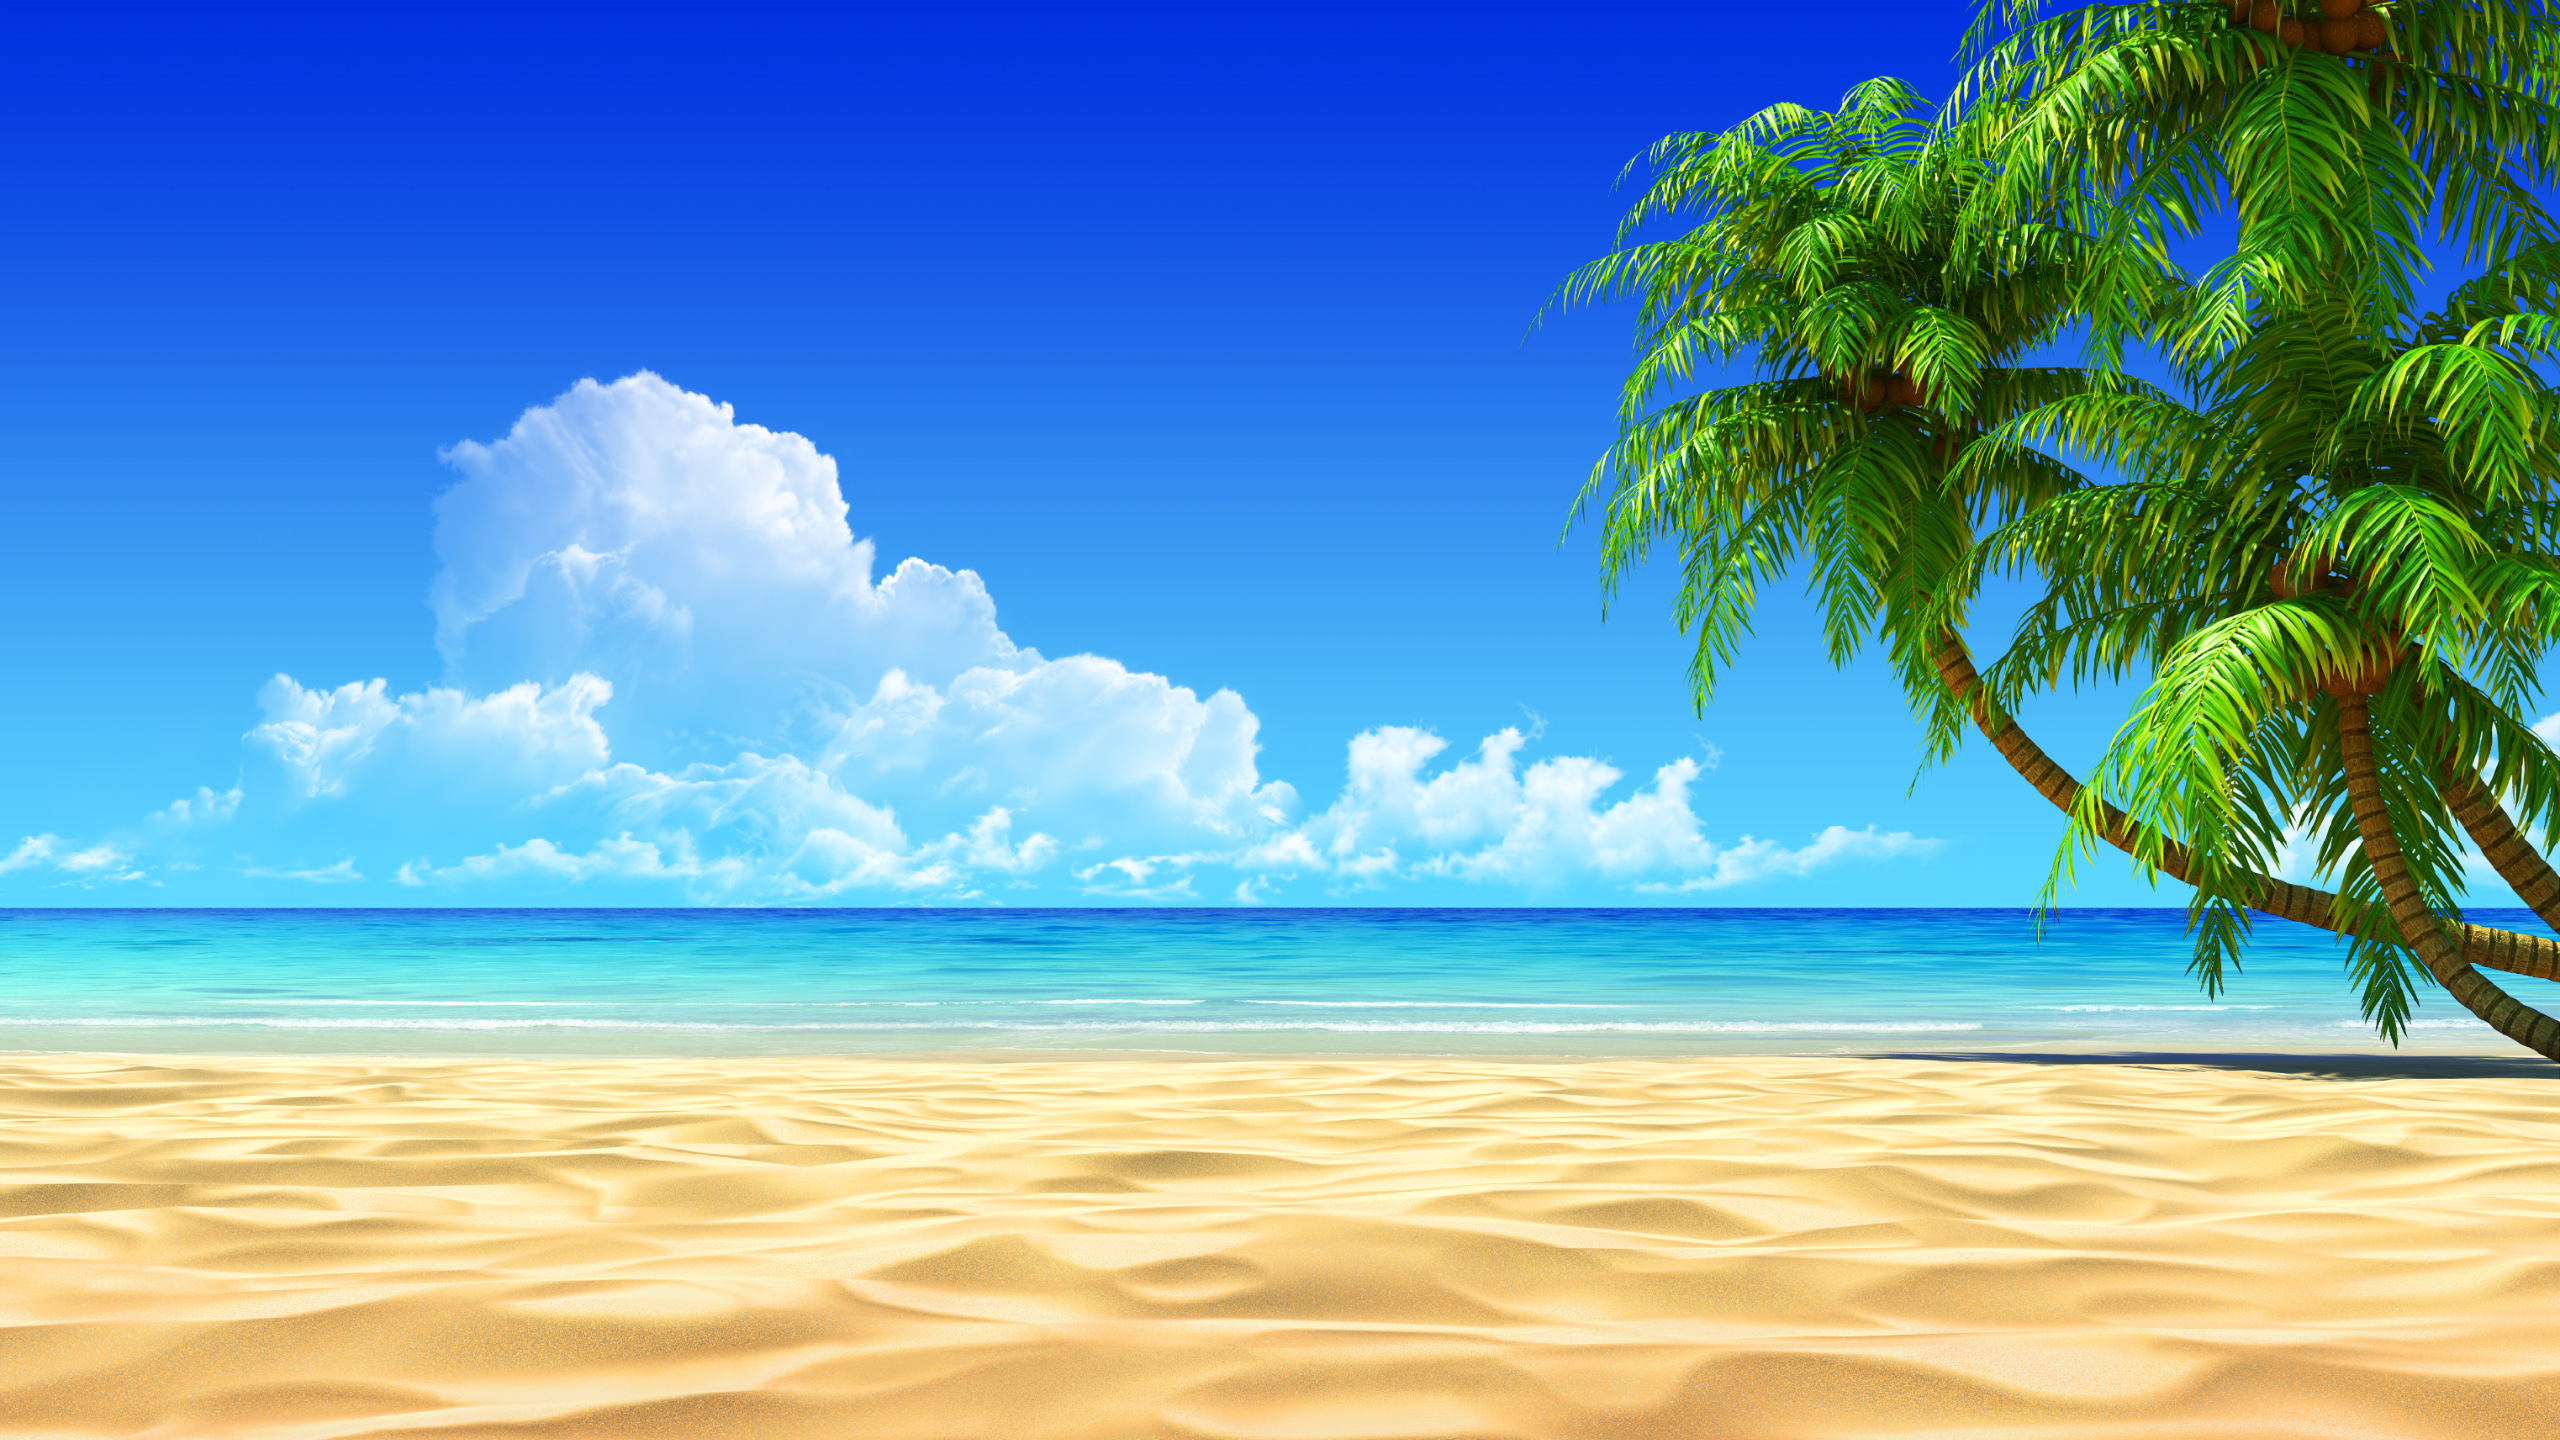 free clipart beach images - photo #39